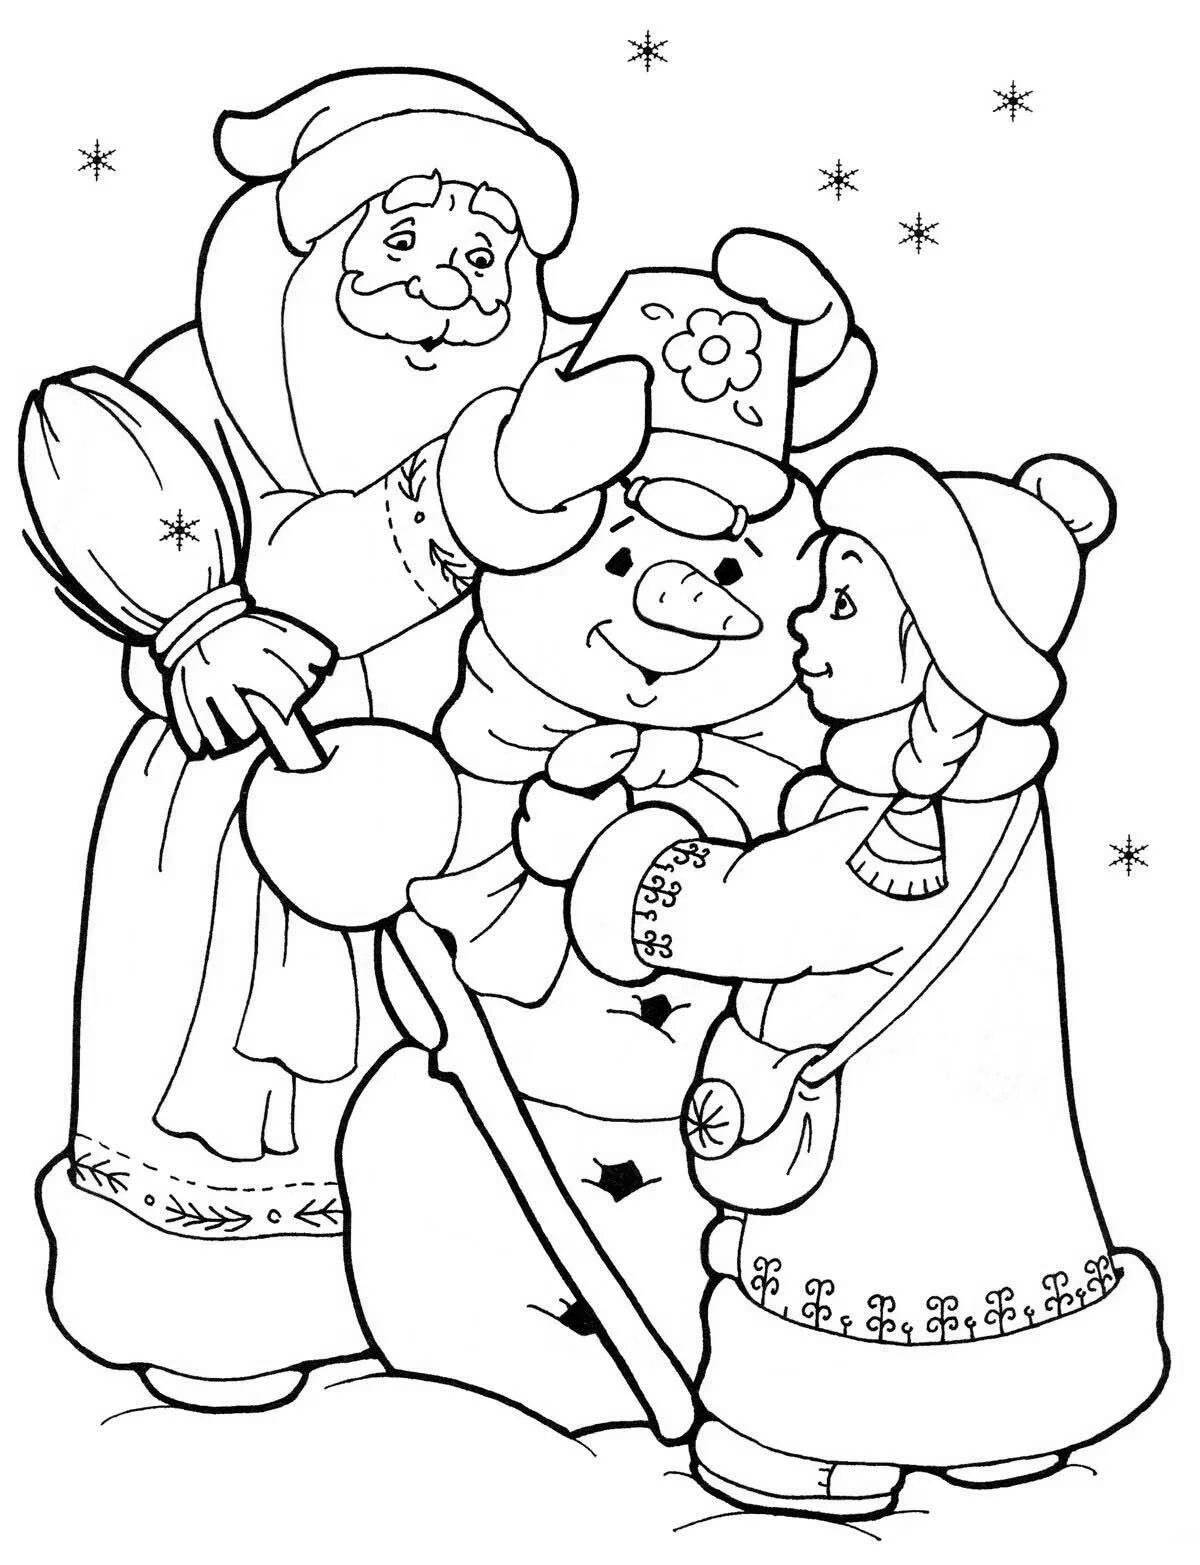 Exquisite coloring pages of Santa Claus and the Snow Maiden